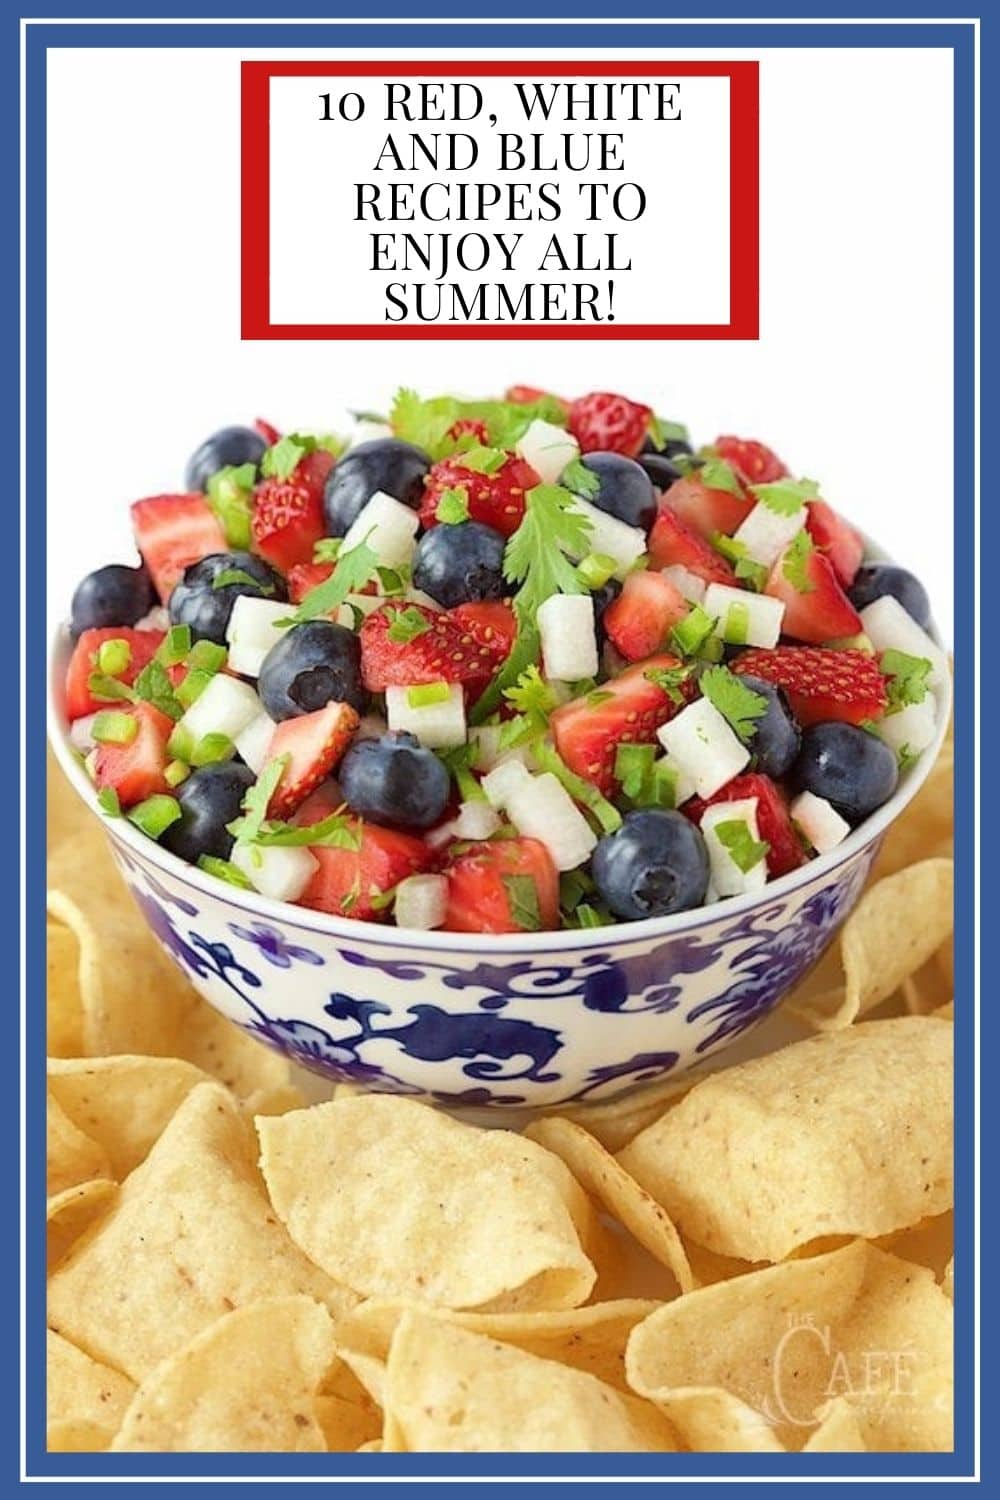 Red, White and/or Blue Recipes to Enjoy All Summer Long!